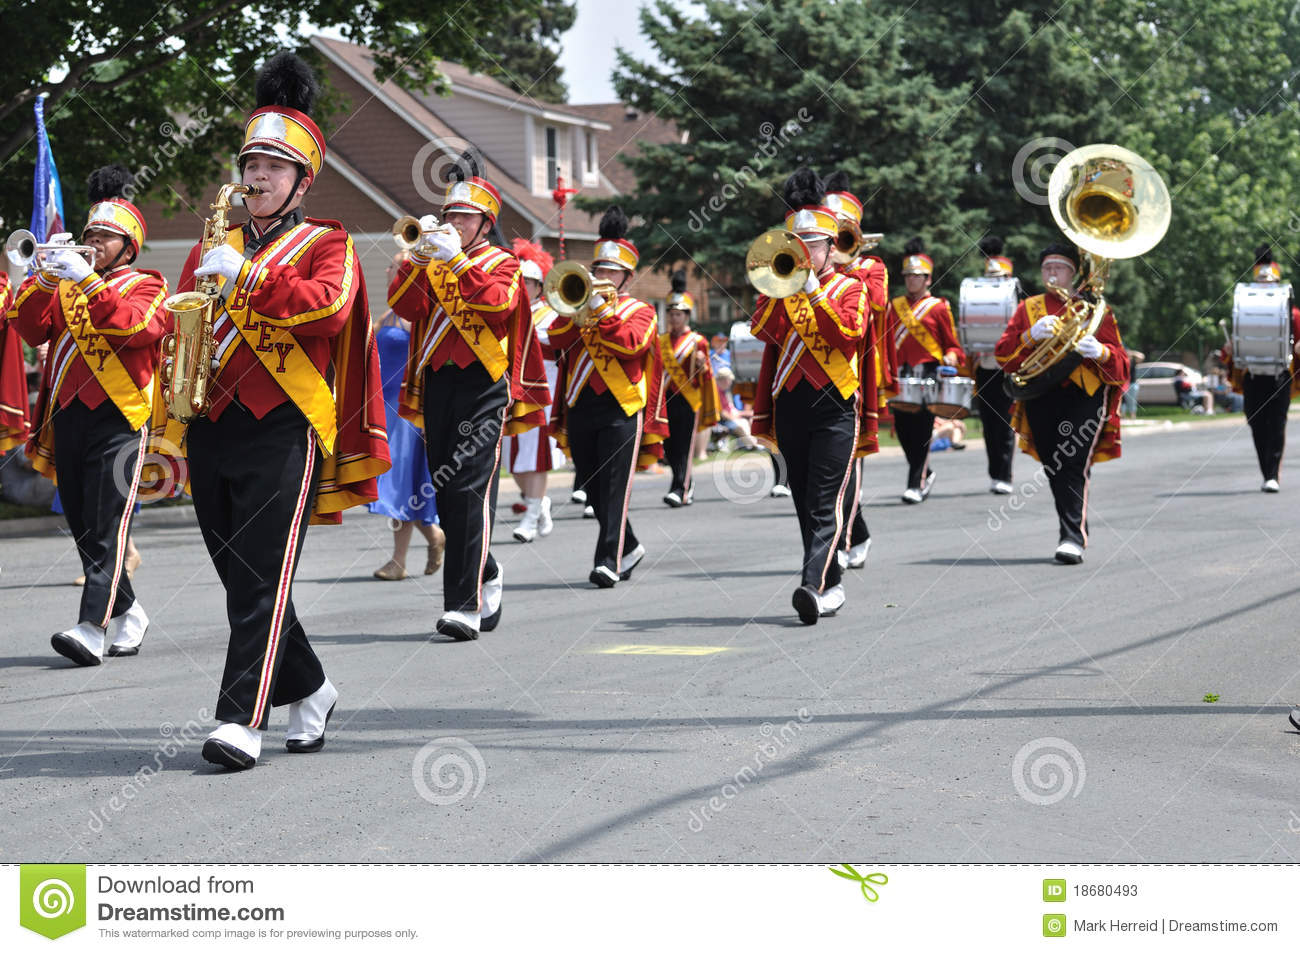 High School Marching Band Clipart High School Marching Band